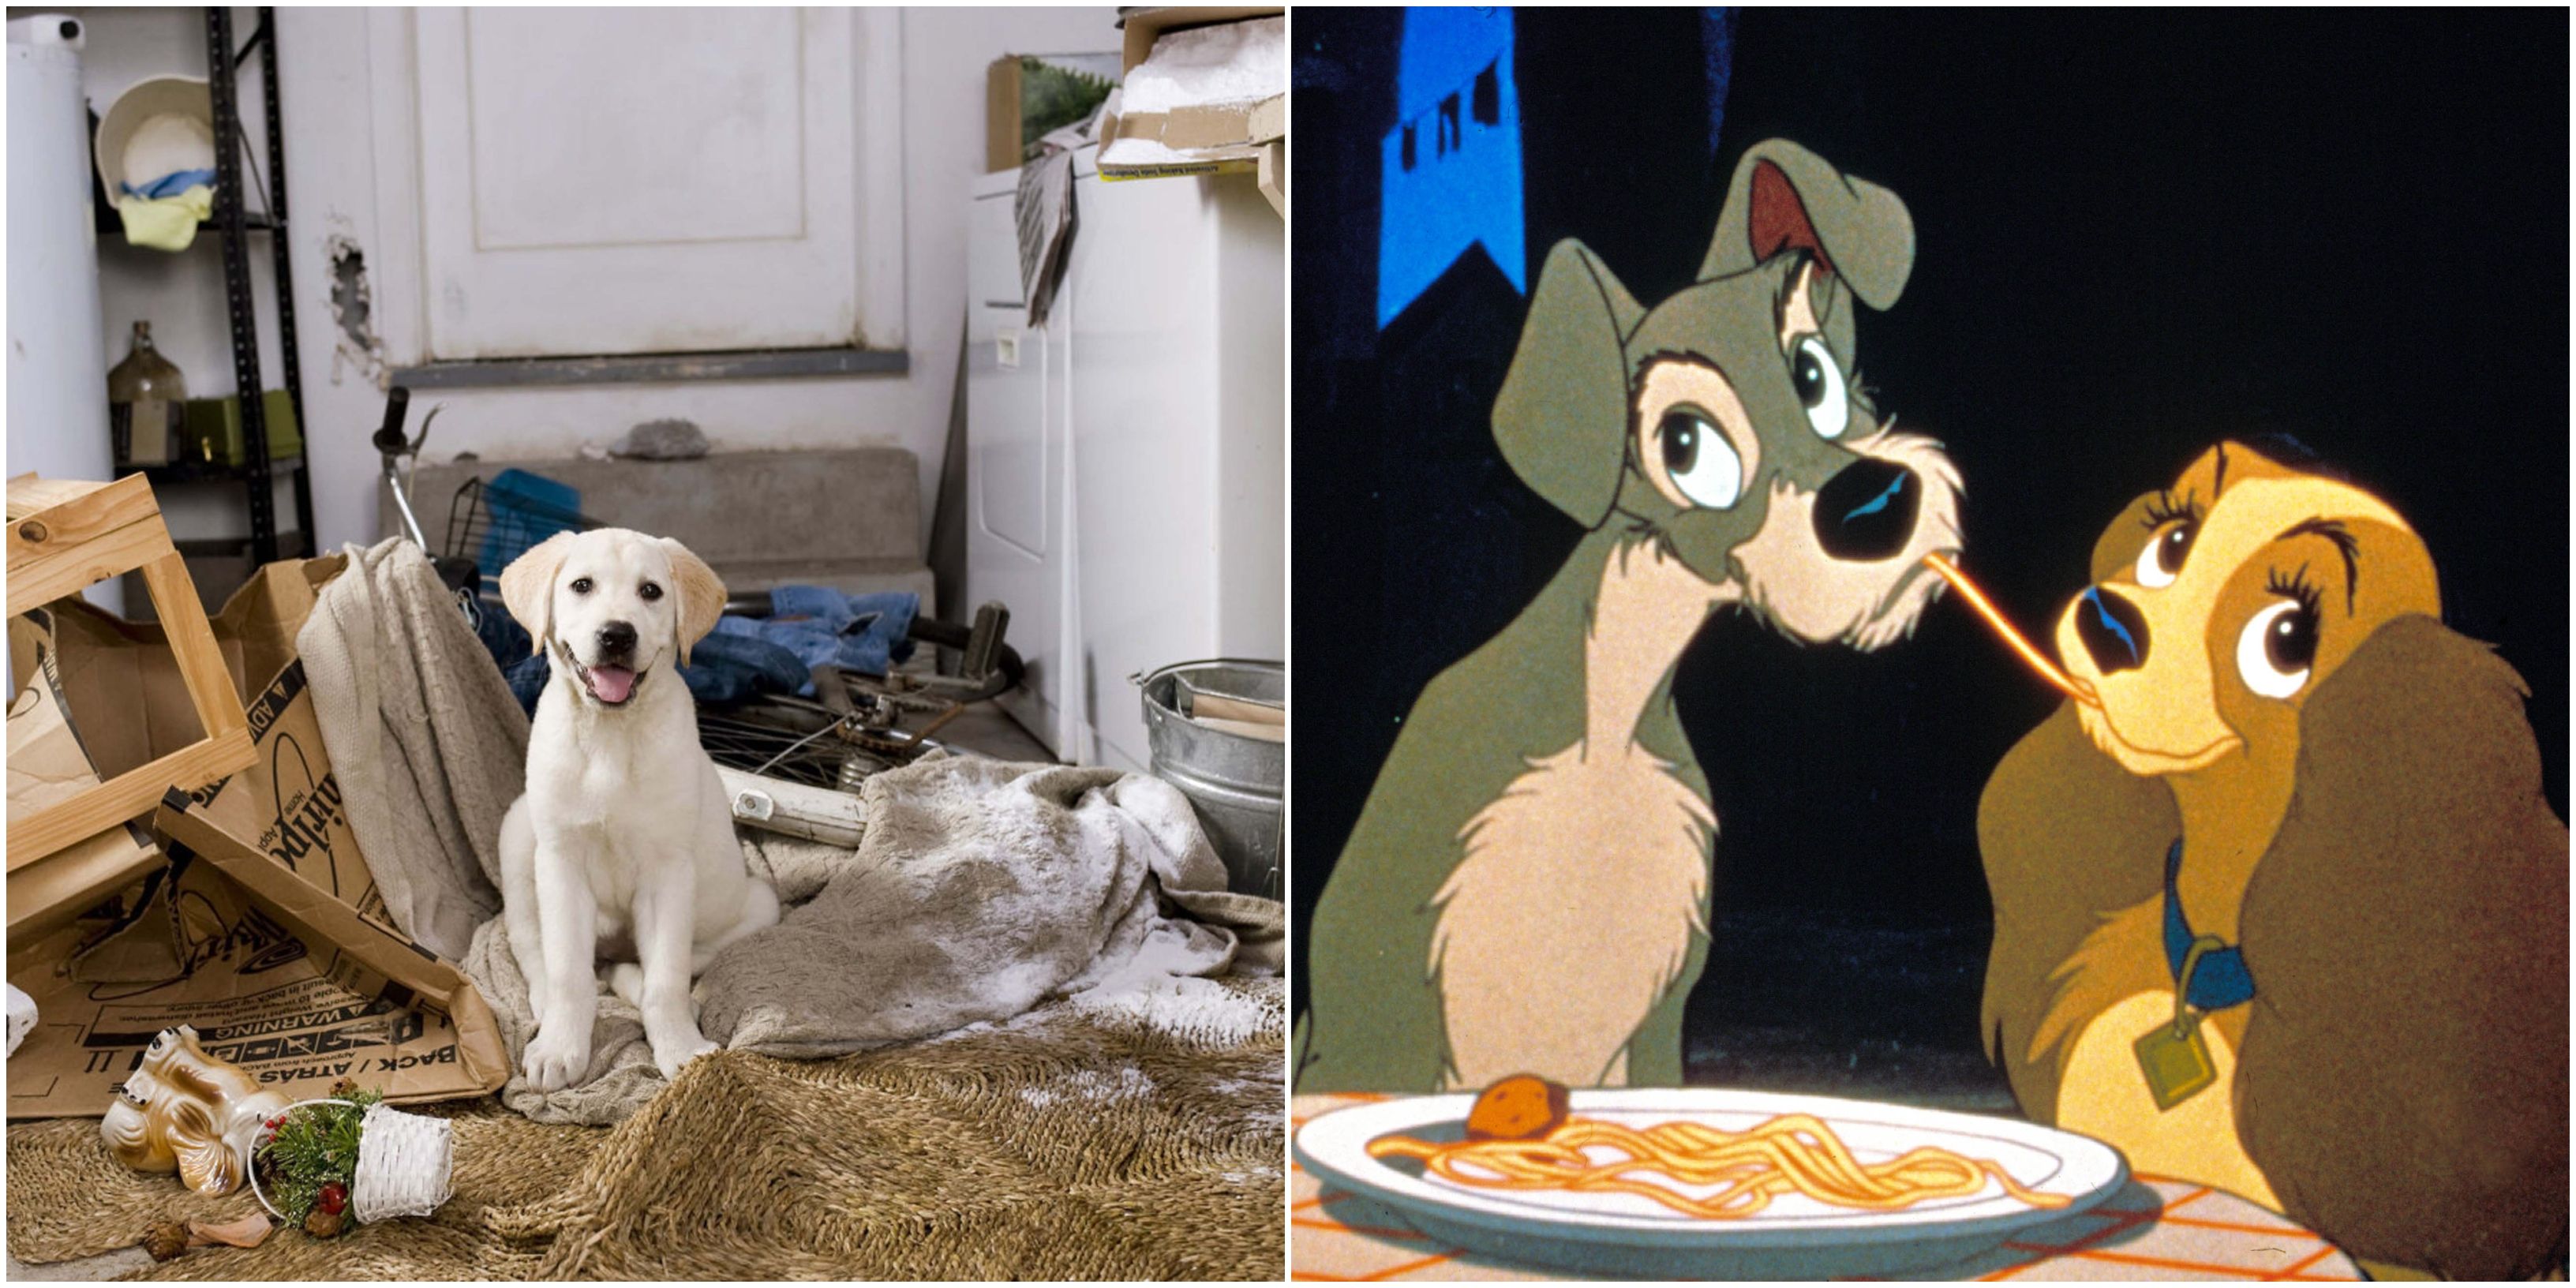 the most famous dog in the movie world